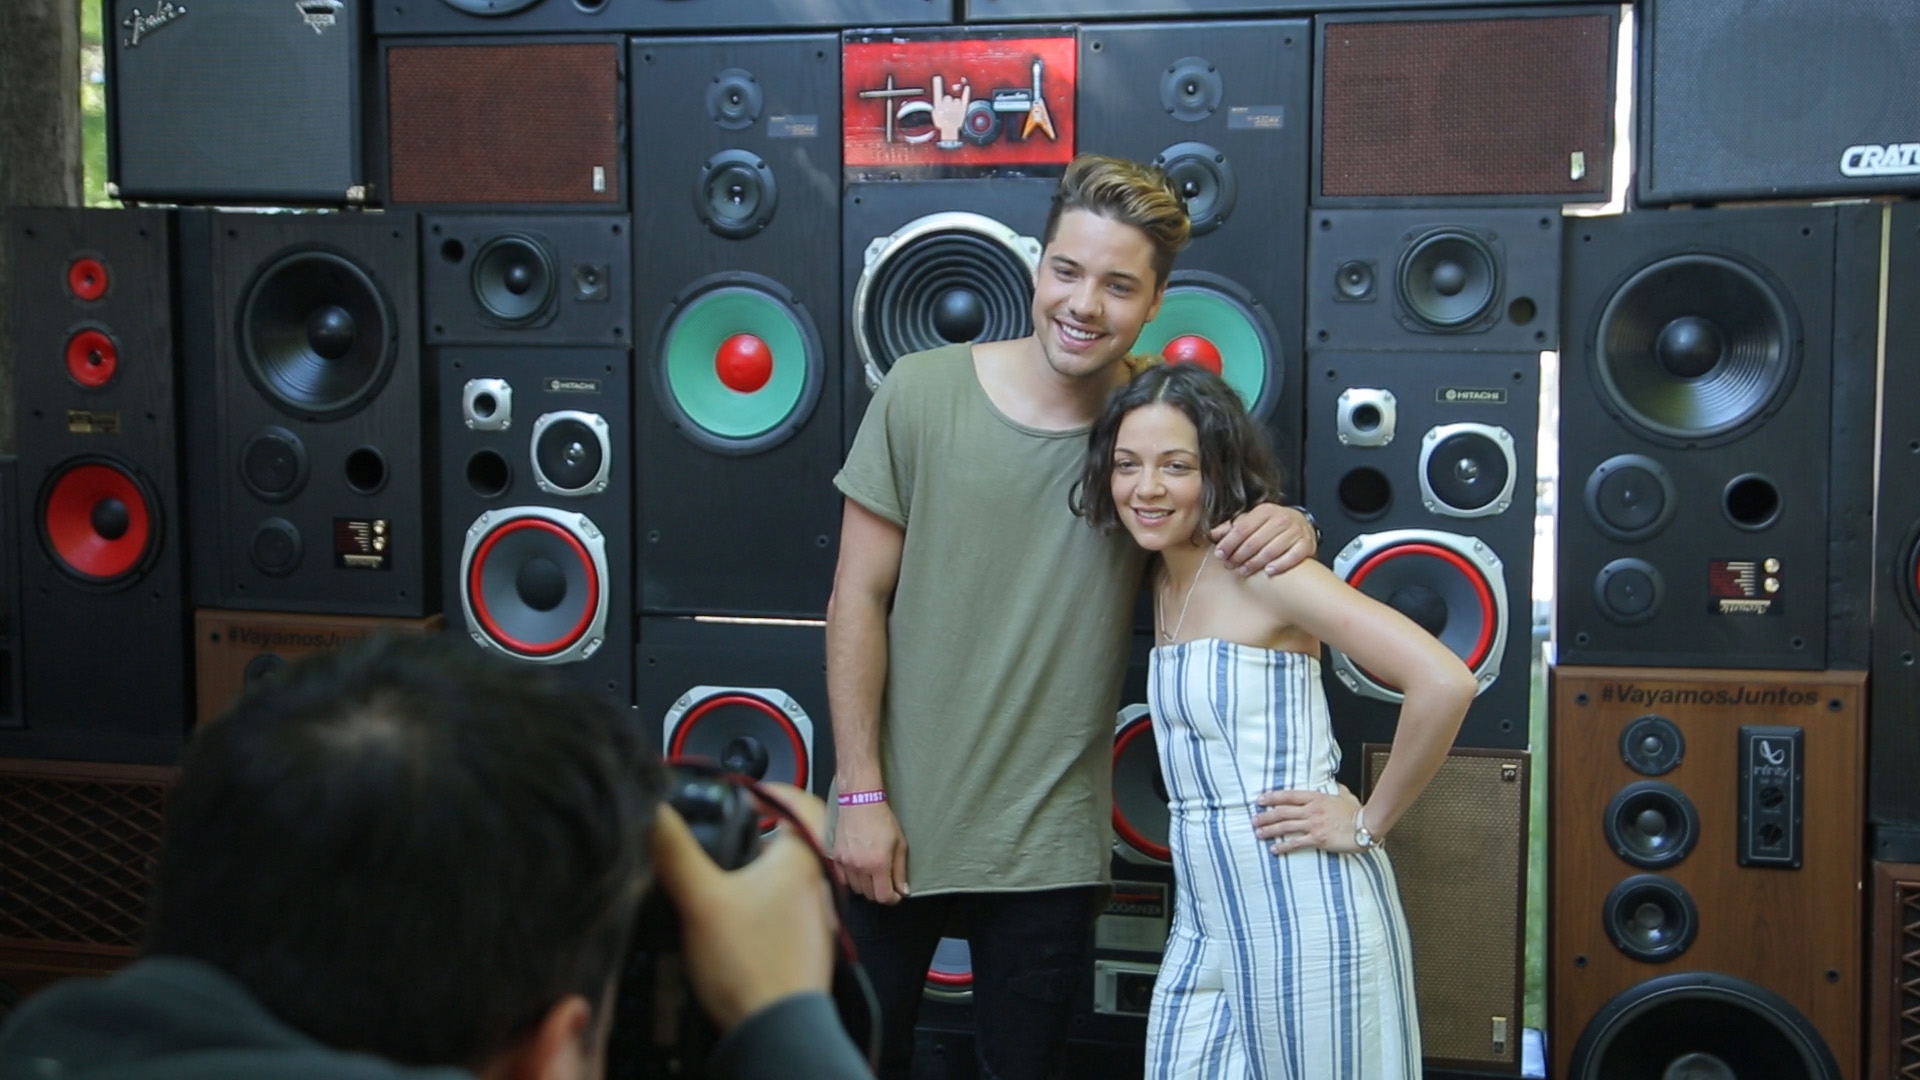 Joining Toyota at Ruido Fest, social media photographer, Bryant Eslava, singer/songwriter Natalia Lafourcade & actor/TV presenter William Valdés capture some moments on camera together.